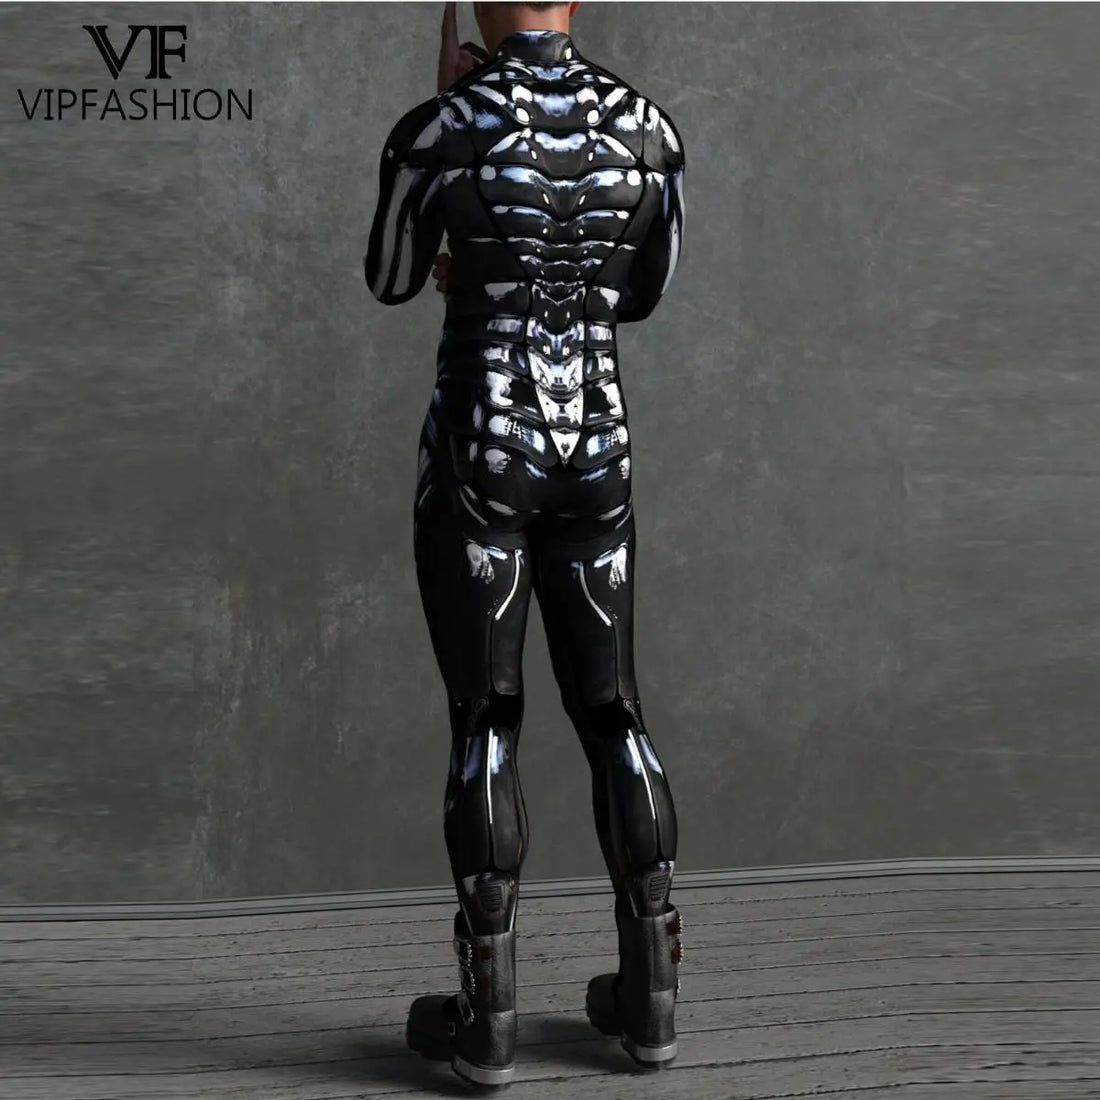 VIP FASHION Robot Costume Men Punk Cosplay Bodysuit Purim Carnival Halloween Zentai Suit 3D Printed Catsuit Rave Party Clothes